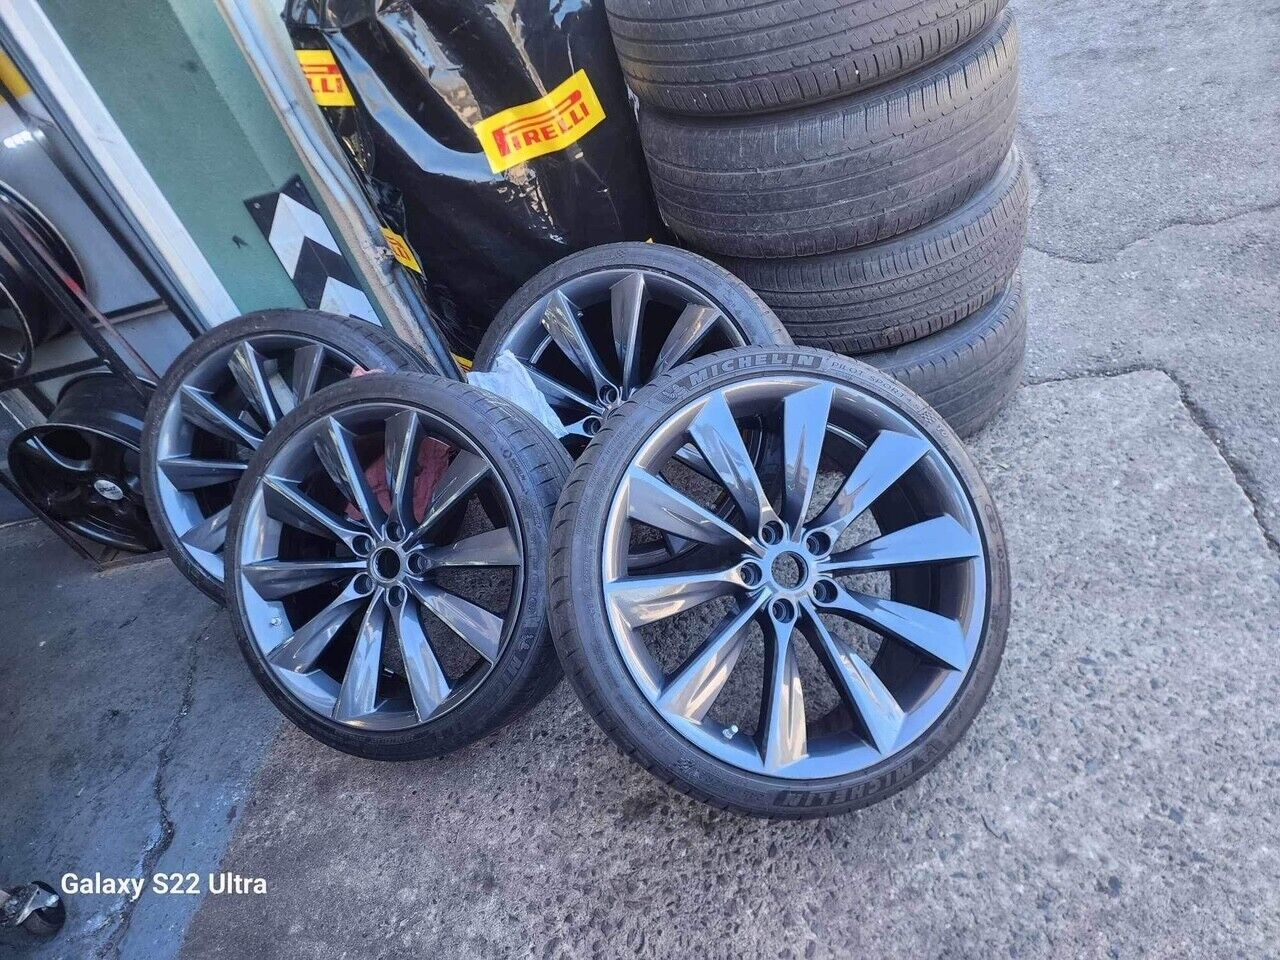 21” OEM Tesla Model S Turbine Wheels and Tires in Excellent/Refinished Condition